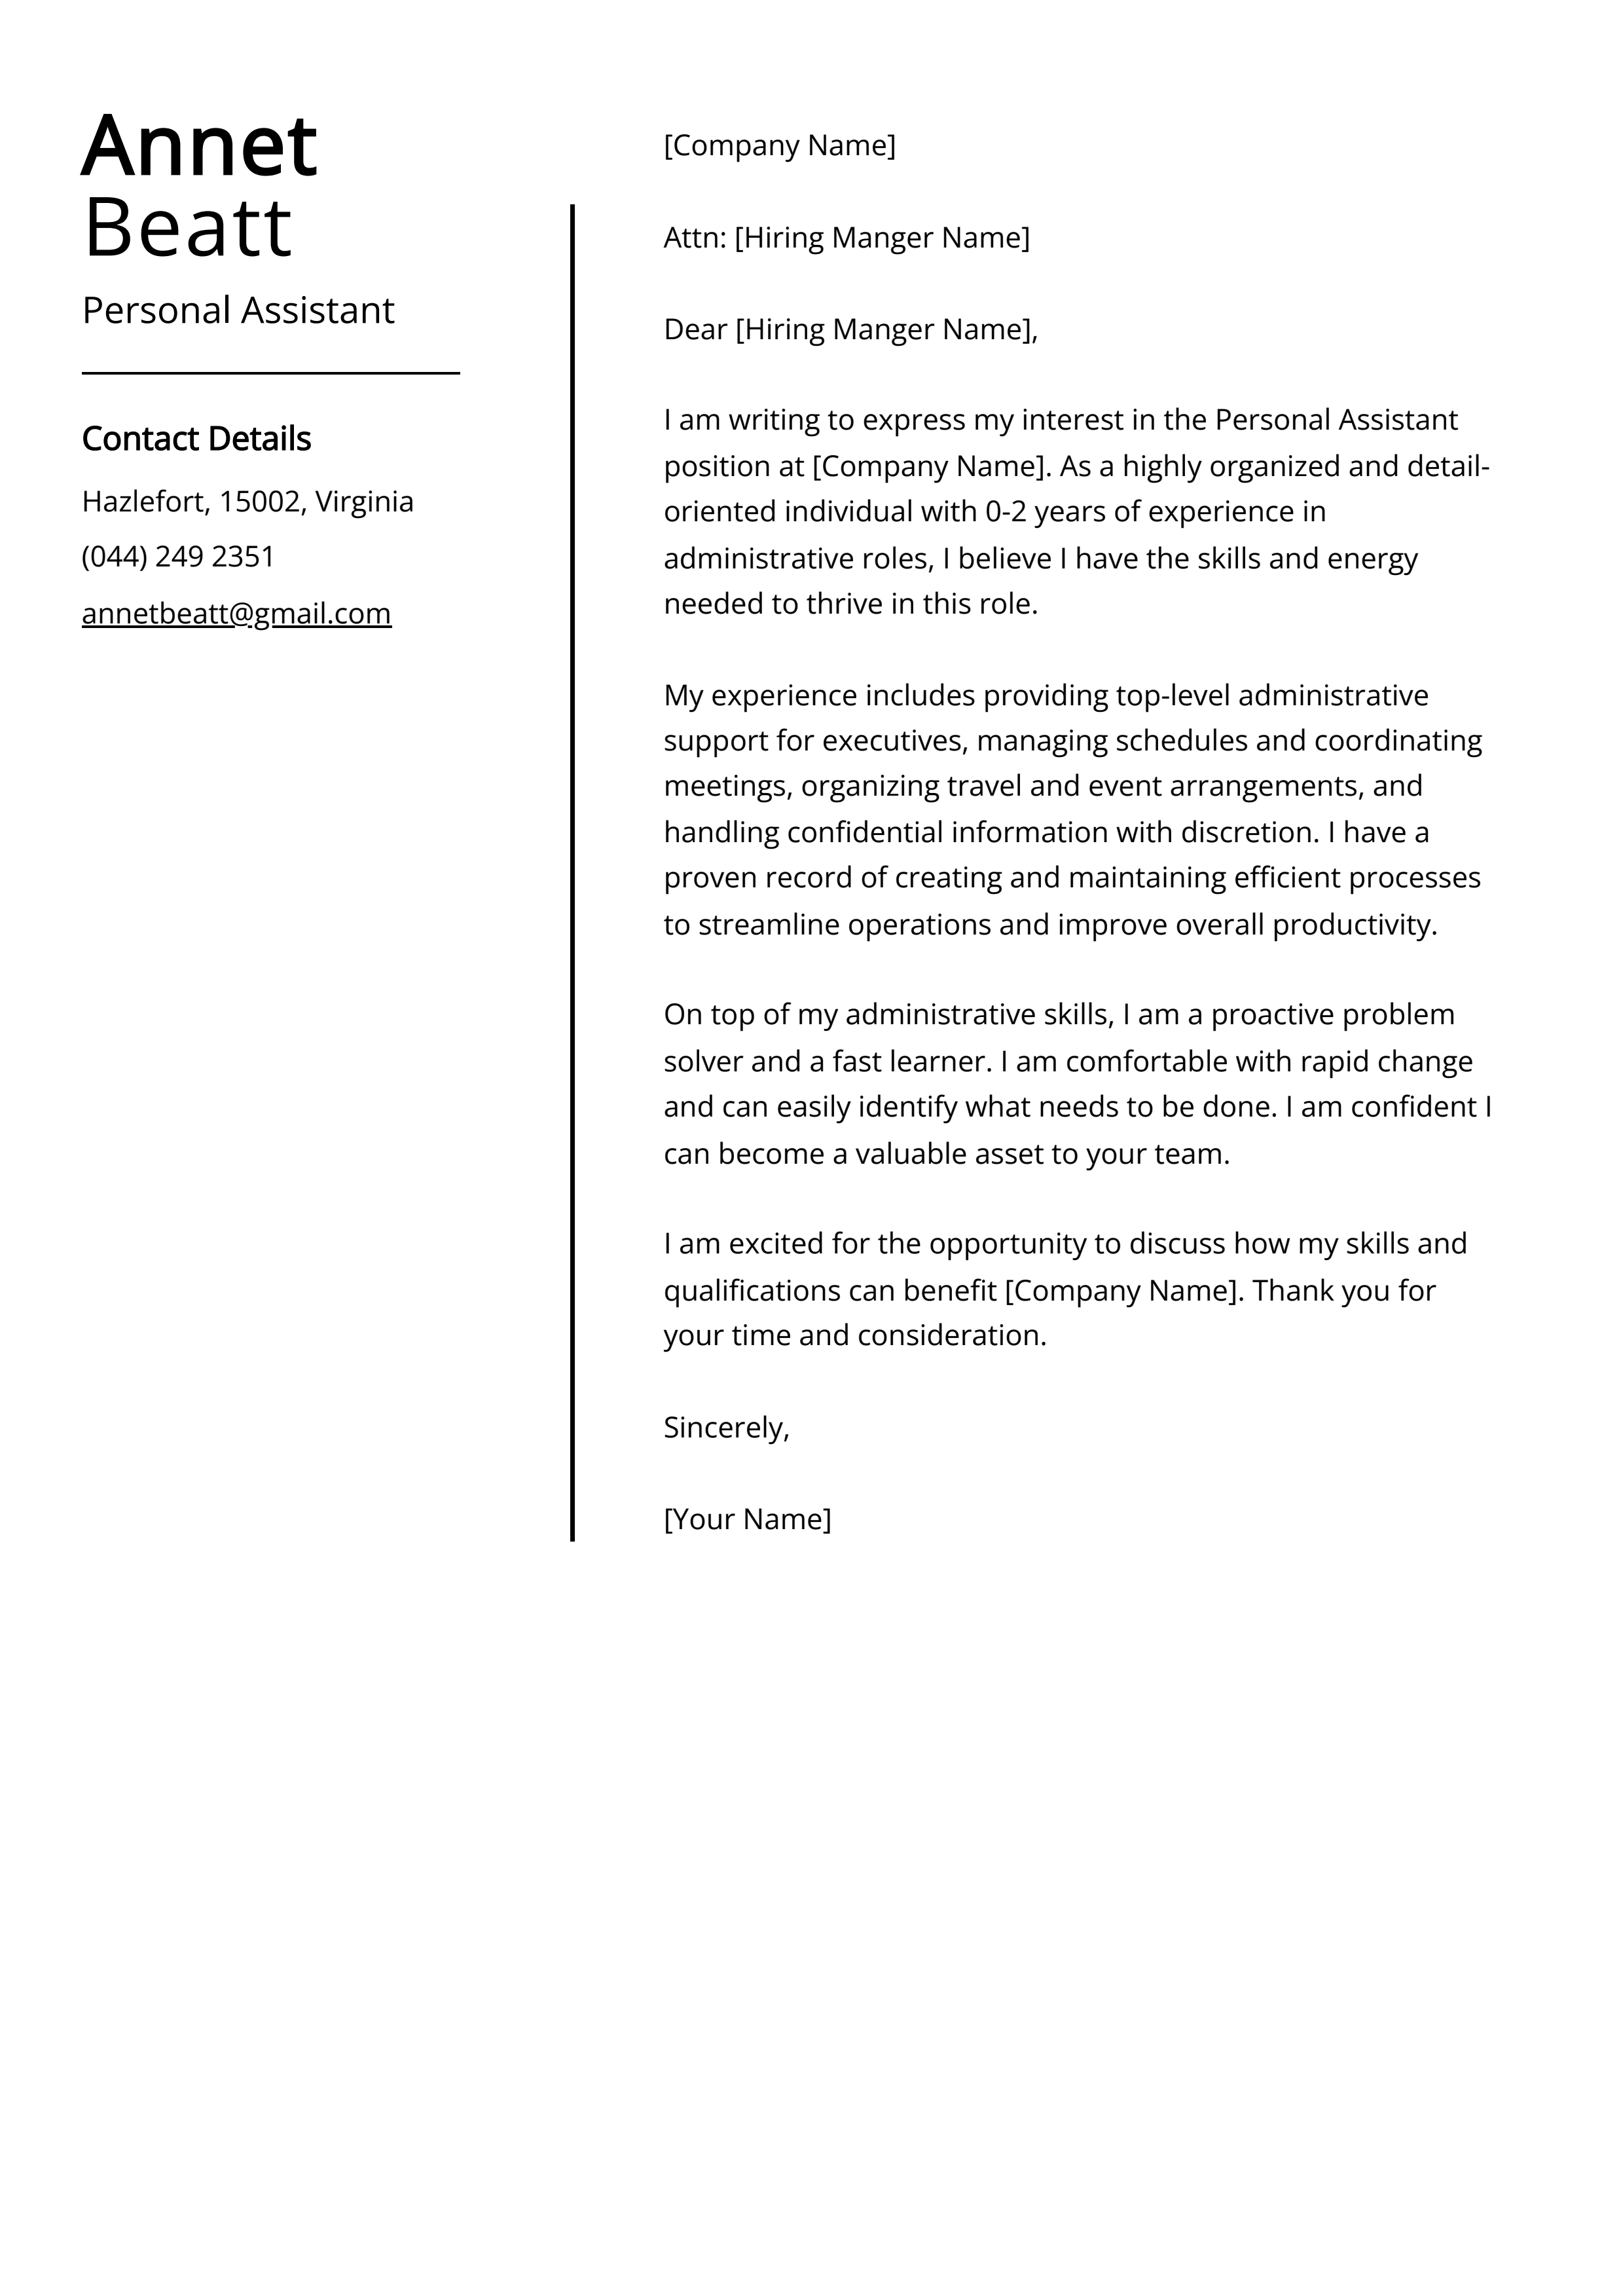 Personal Assistant Cover Letter Example